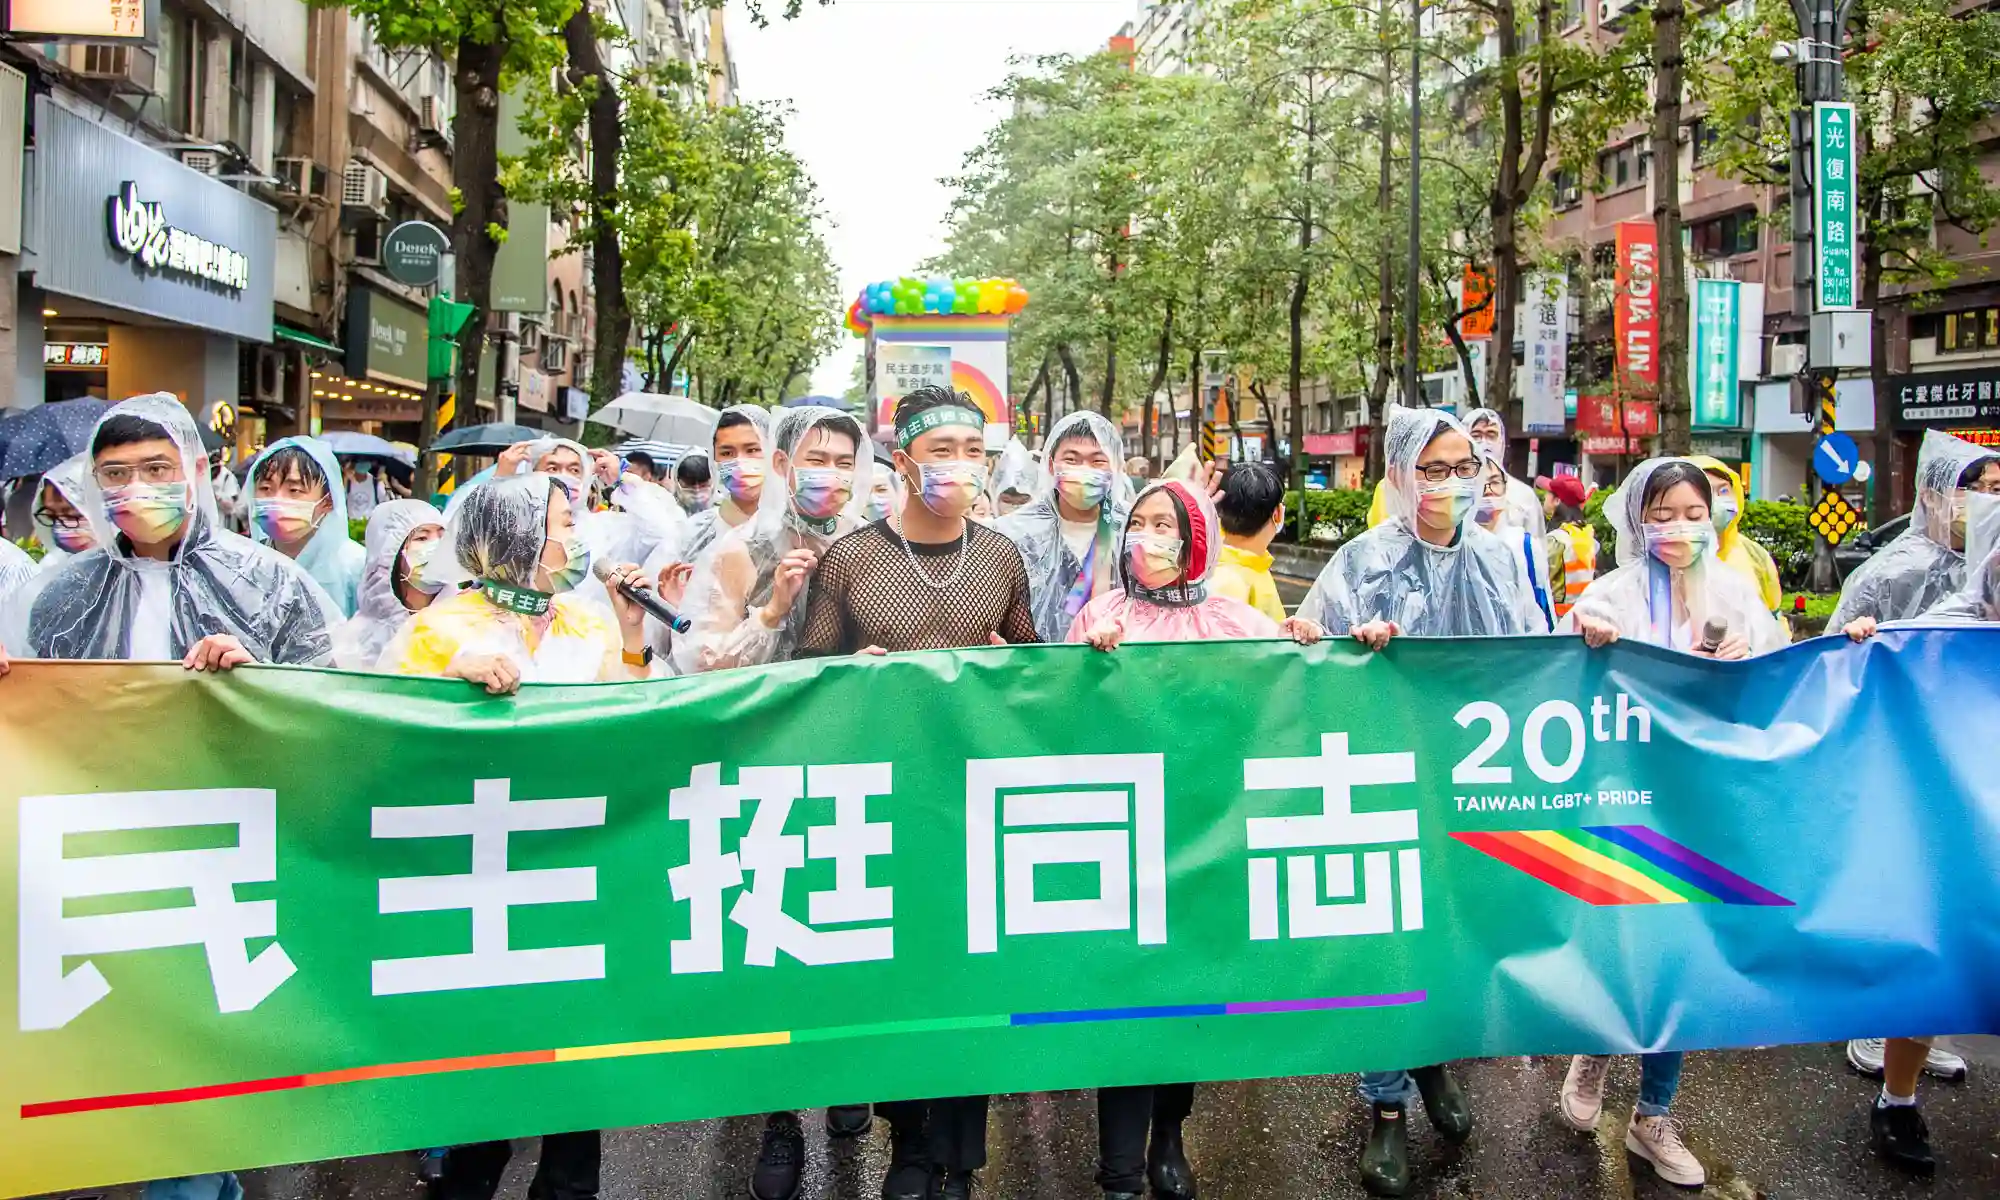 Marchers hold a banner that reads "Democracy supports Pride".